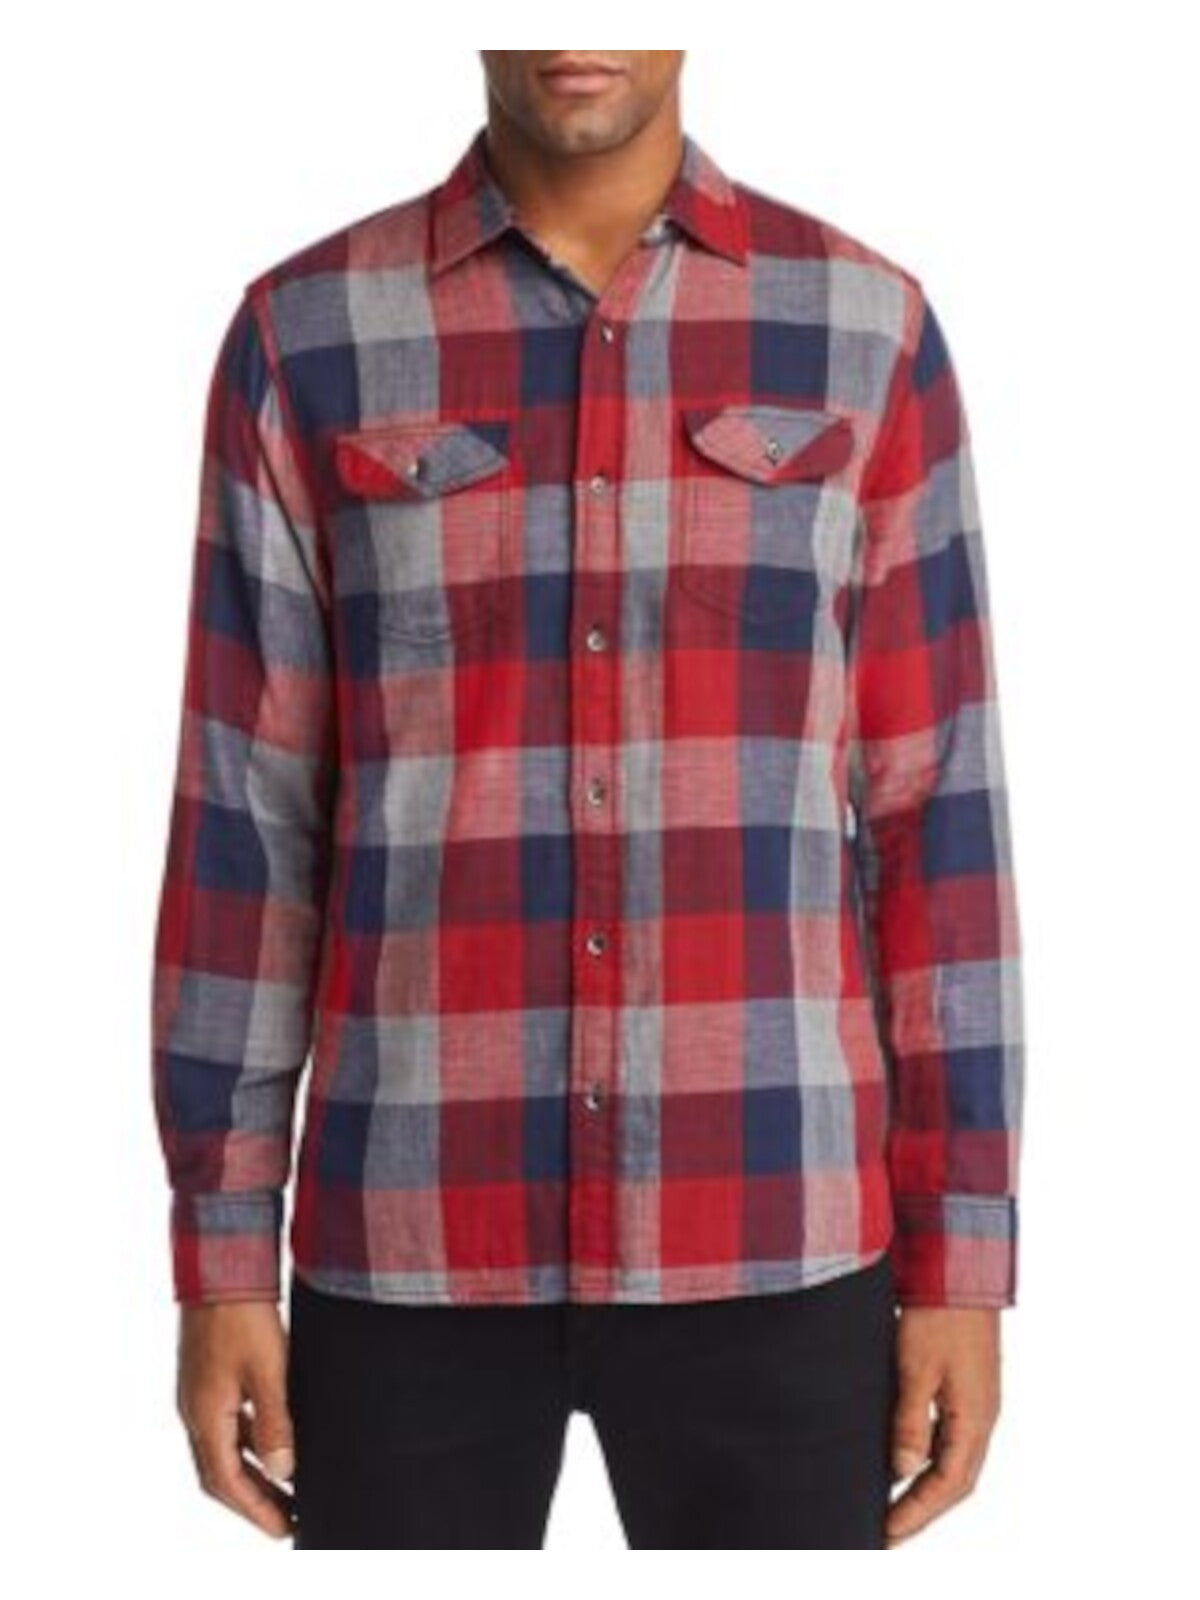 FLAG & ANTHEM Mens Double-faced Red Plaid Long Sleeve Collared Classic Fit Button Down Shirt L